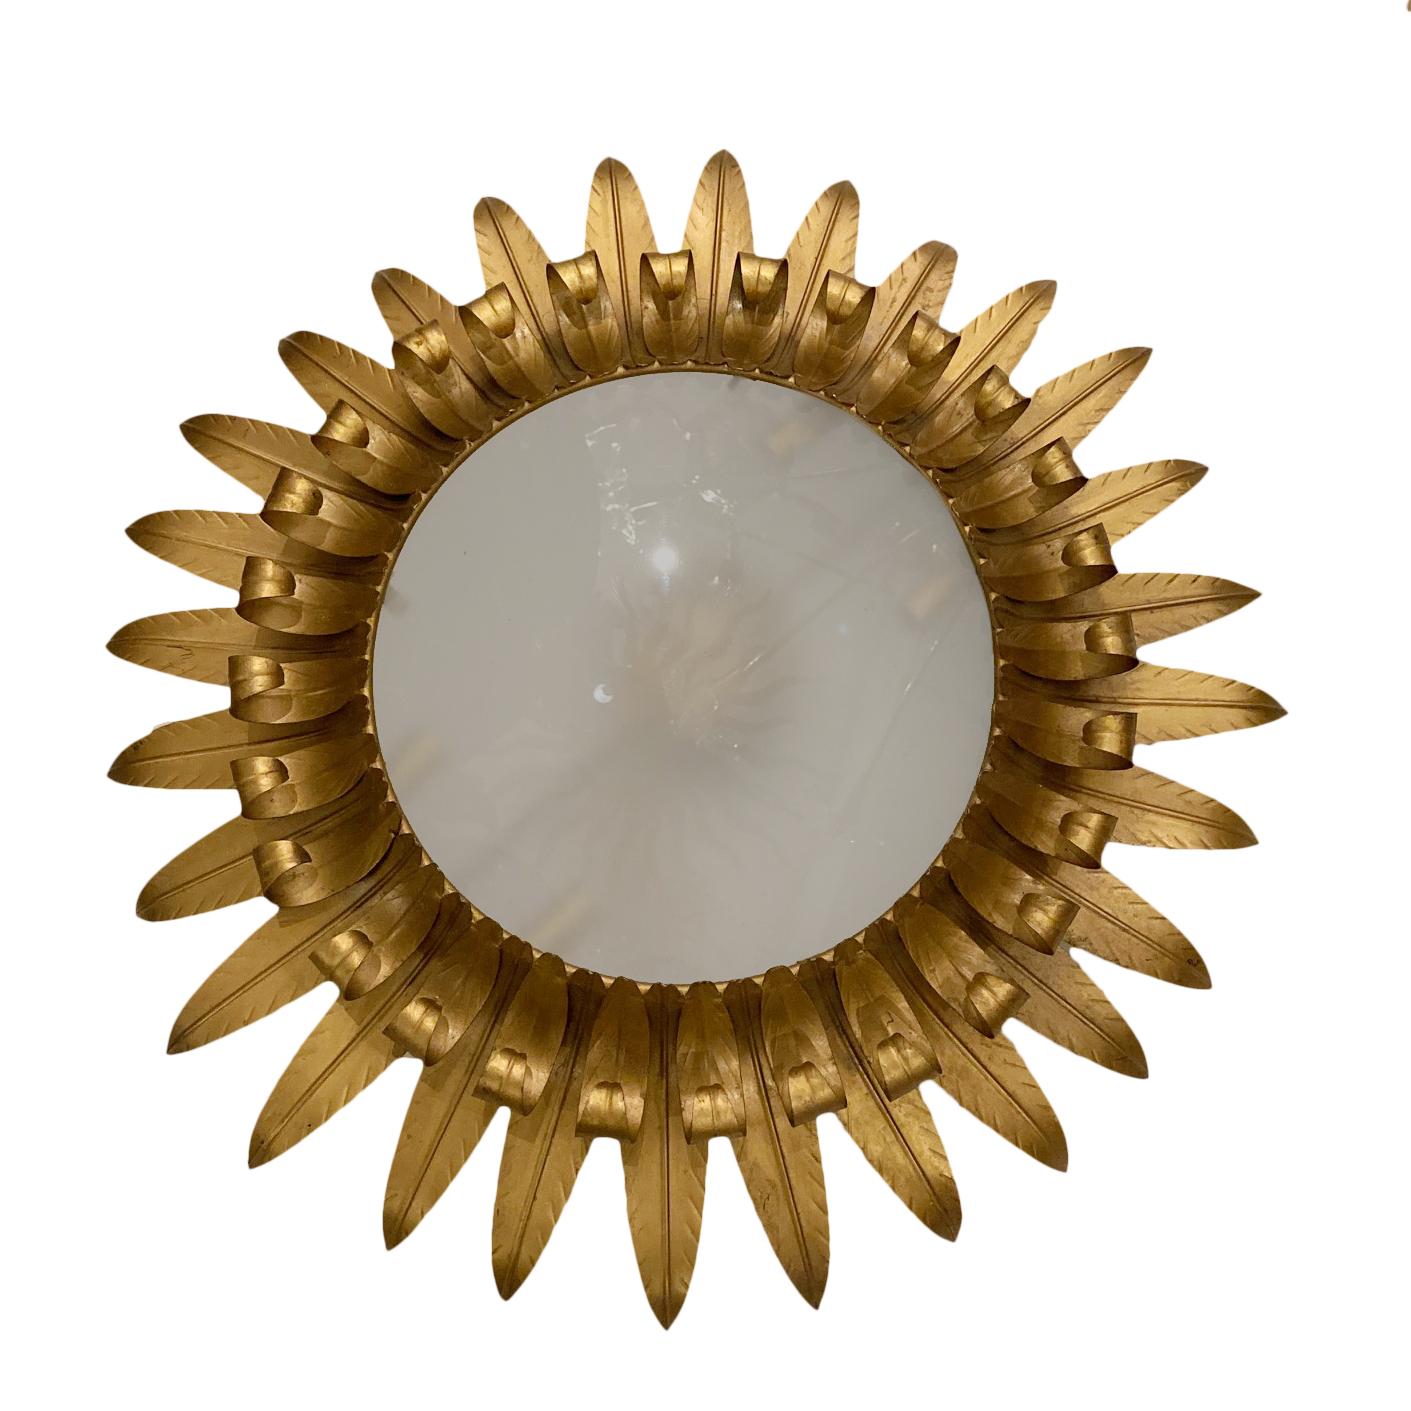 A circa 1950's French sunburst shaped light fixture with frosted glass inset.

Measurements:
Diameter 26